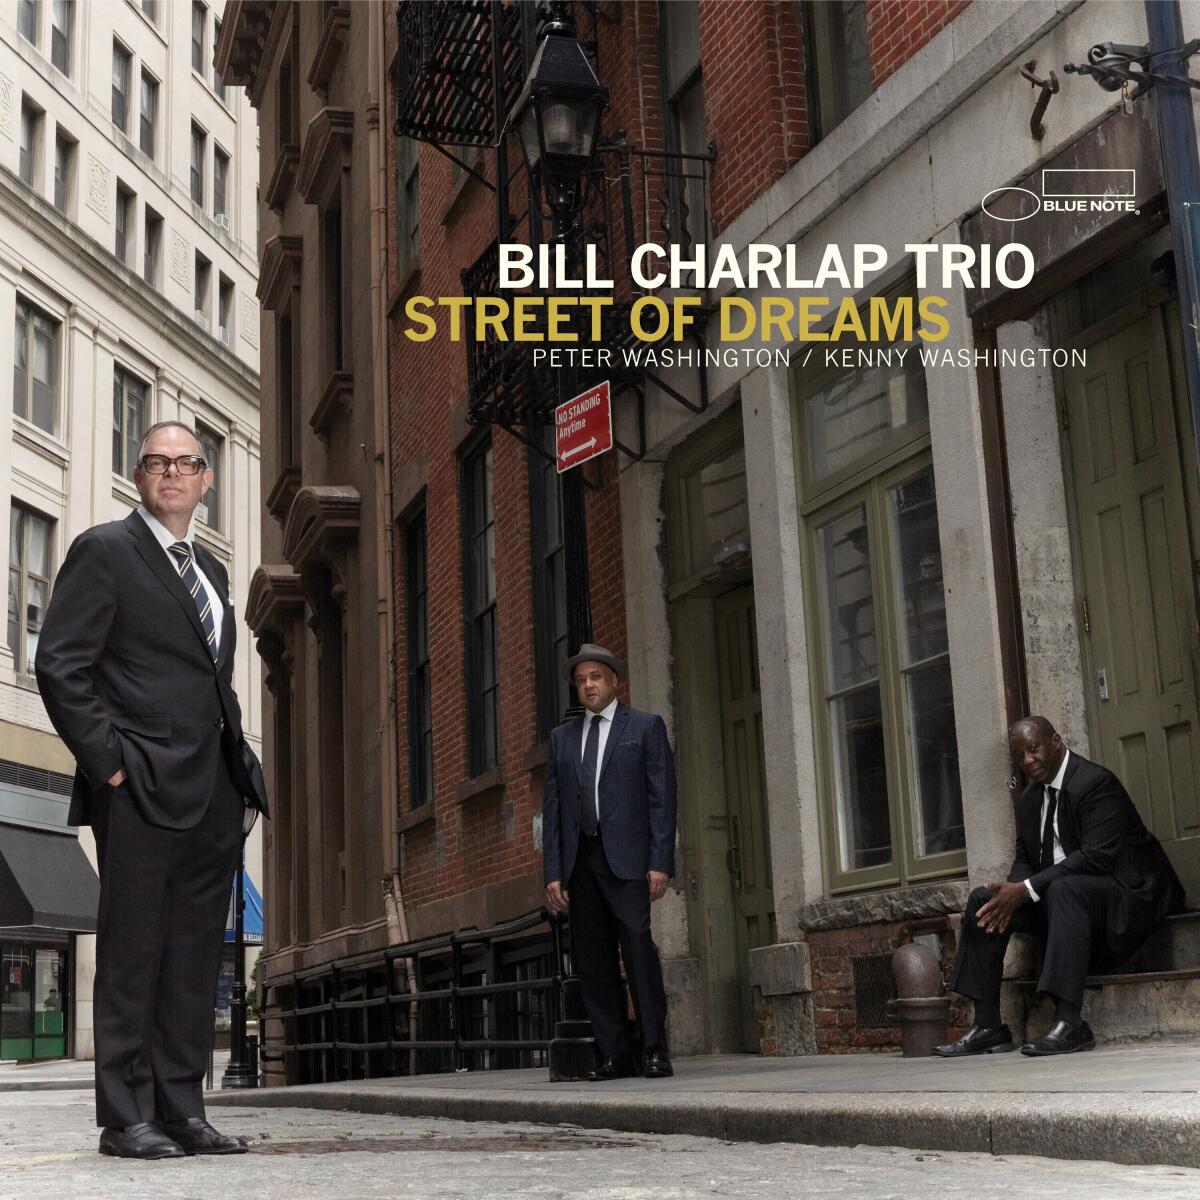 This image released by Blue Note Records shows album cover art for “Street of Dreams,” by Bill Charlap Trio. (Blue Note Records via AP)